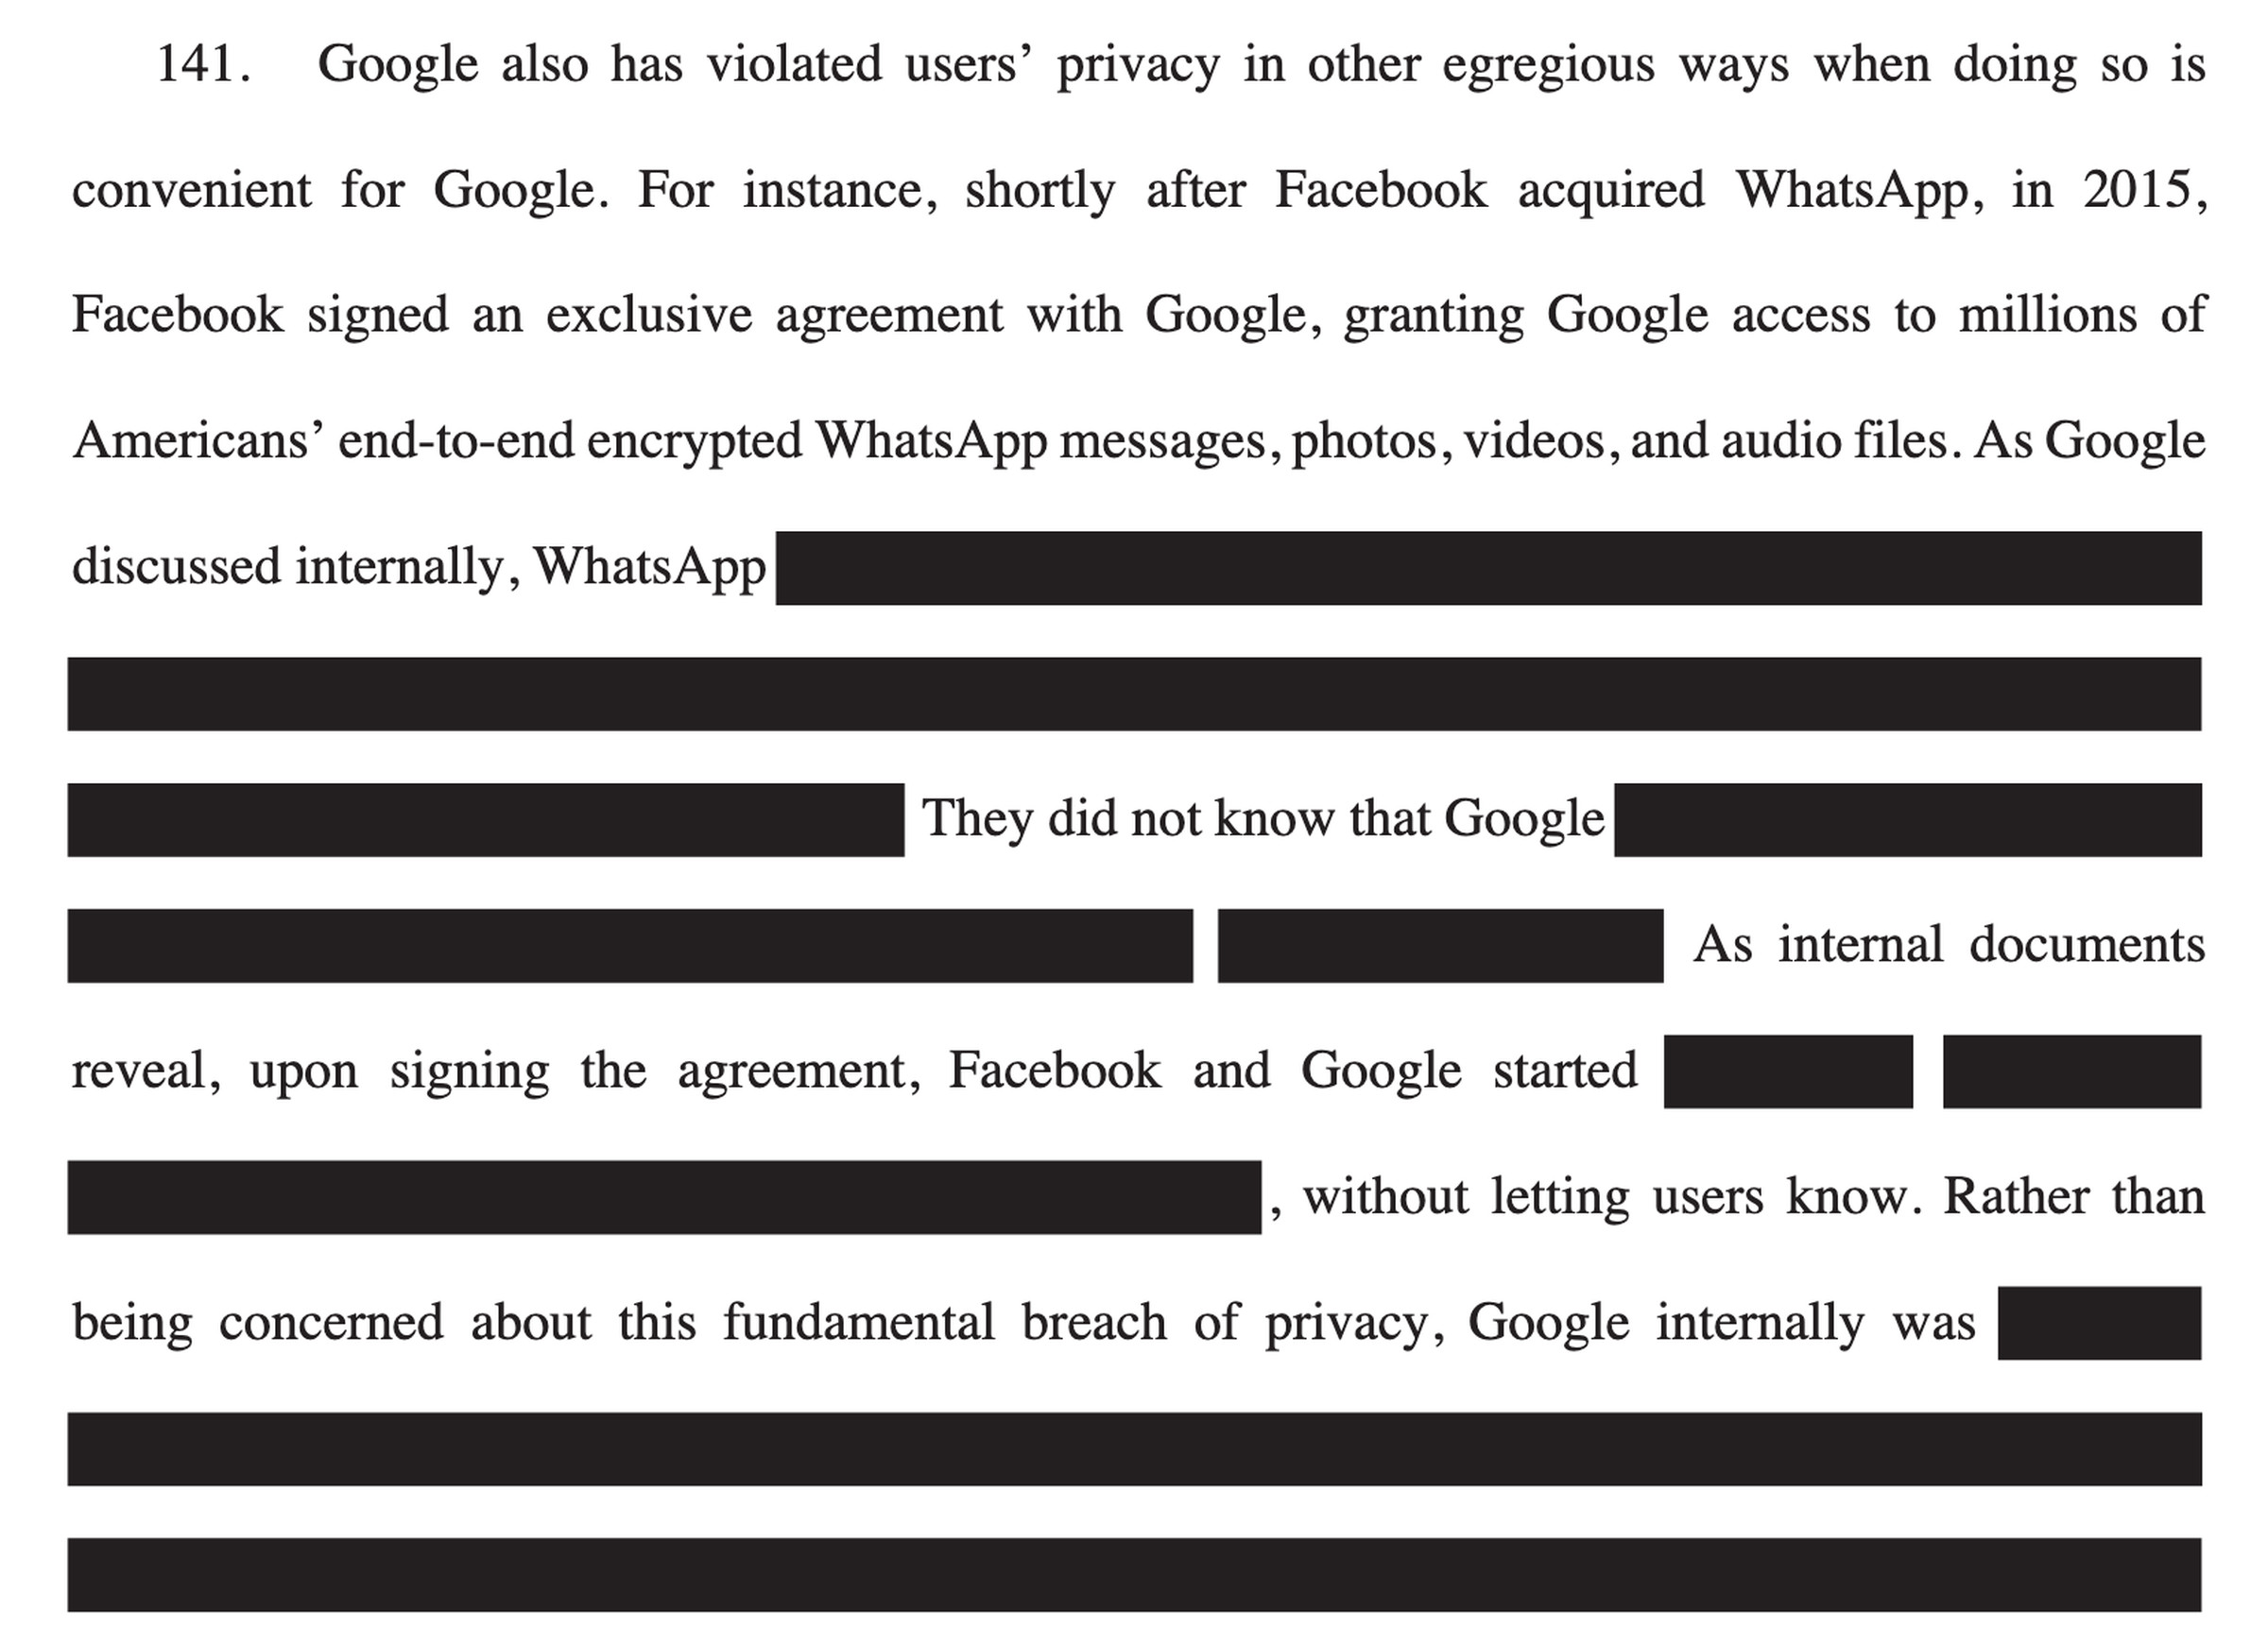 An excerpt from p57 of the Texas v. Google complaint.